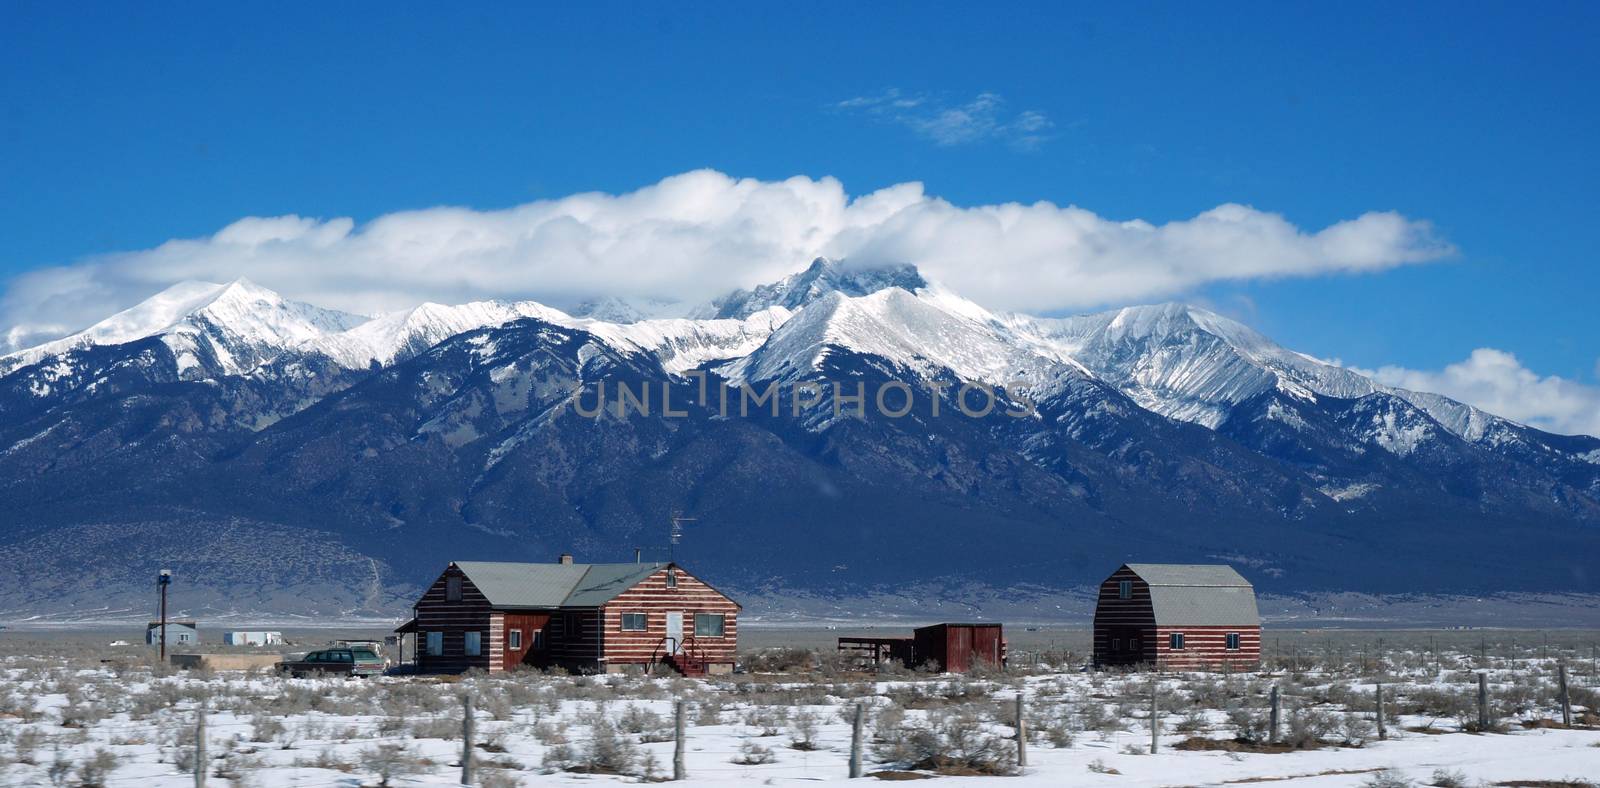 View of the Colorado winter with litter house and Rocky mountain as background.